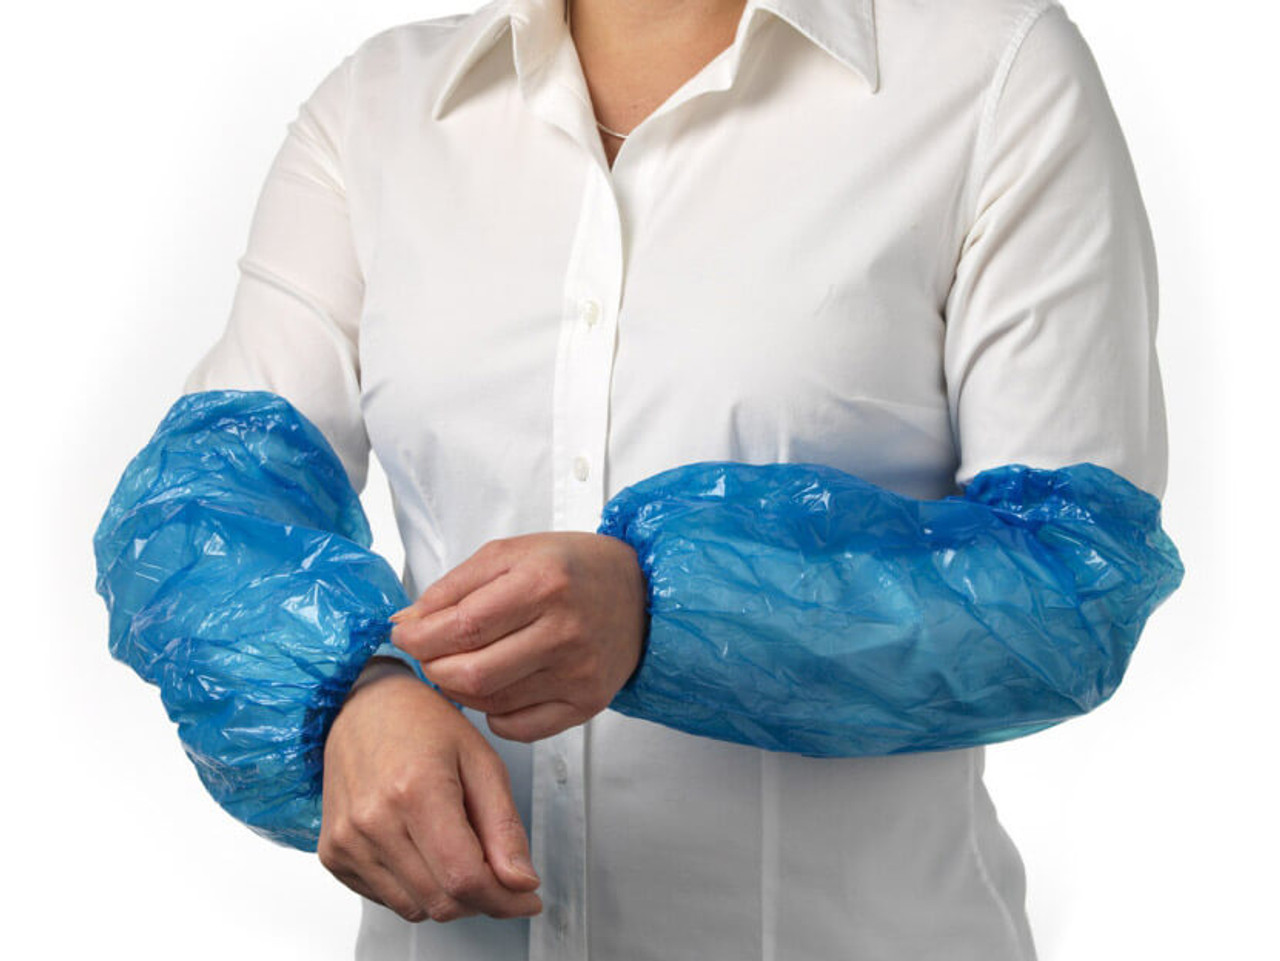 Disposable Blue Plastic Sleeves Covers Arm Protectors with